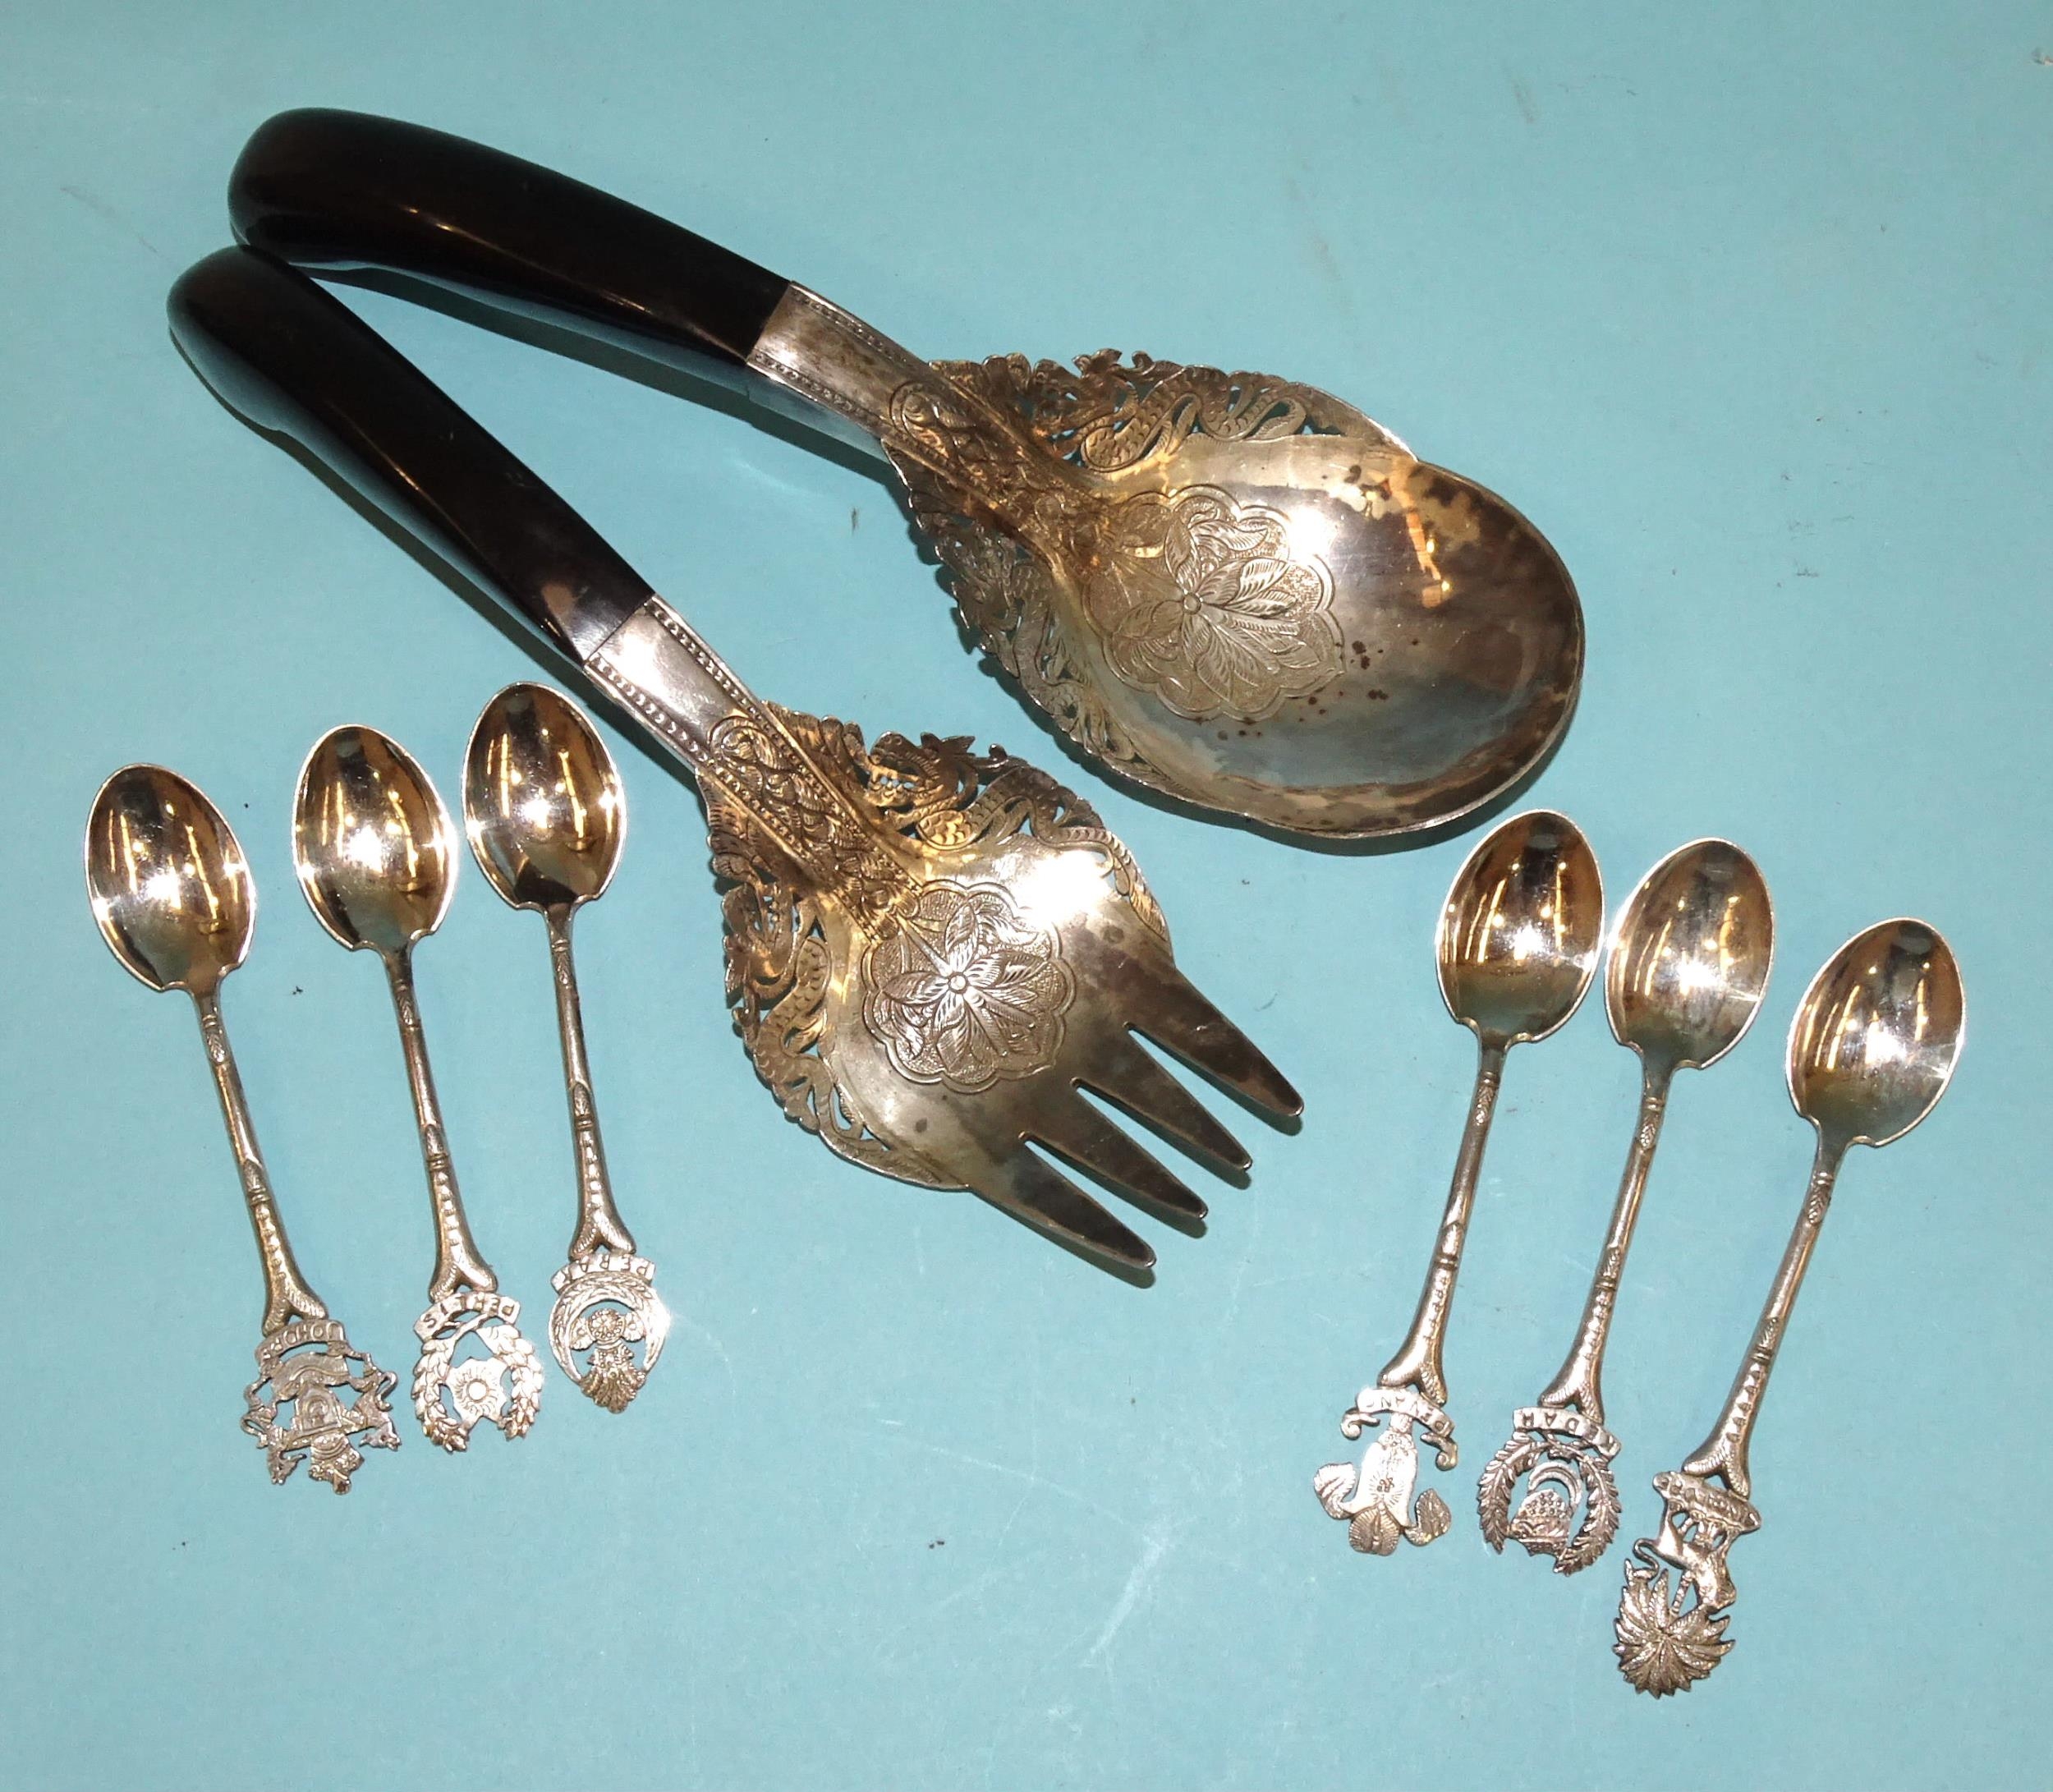 A pair of Malaysian white metal horn-handled salad servers with floral and leaf decoration and six